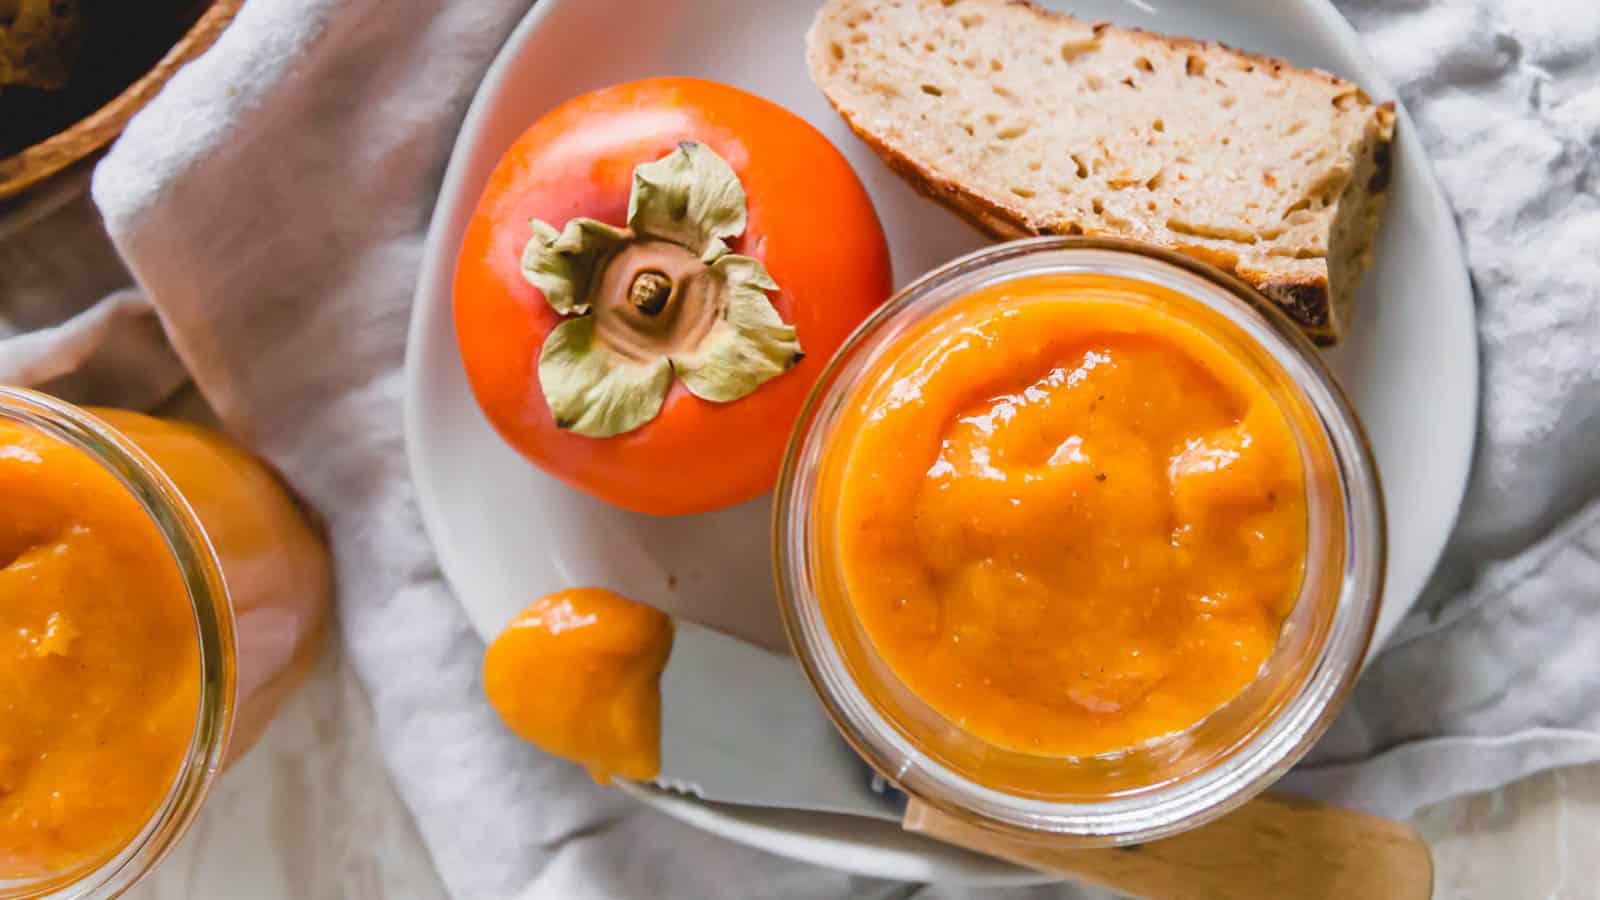 Persimmon jam in a glass jar with persimmons and toast on the side.